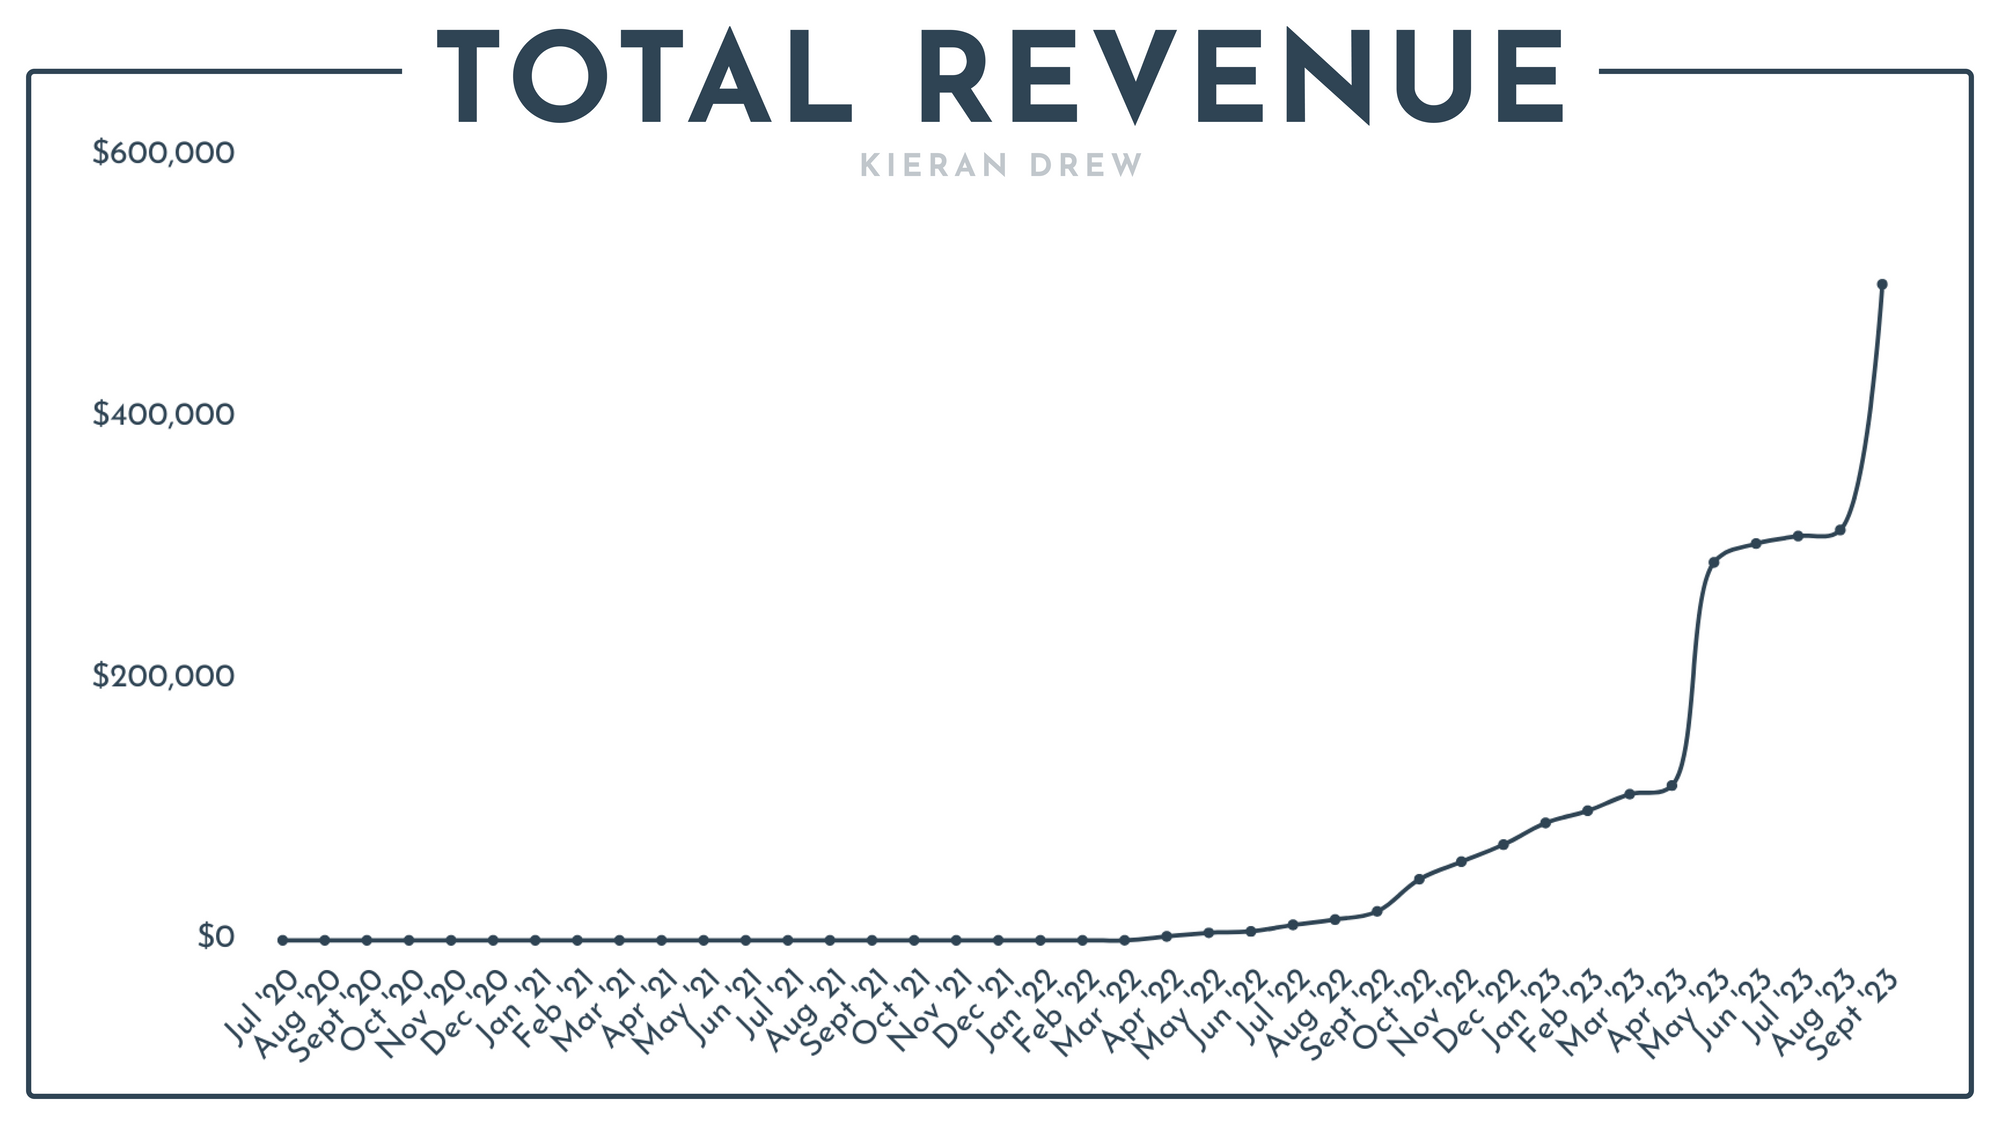 TOTAL REVENUE LINE CHART ALL TIME